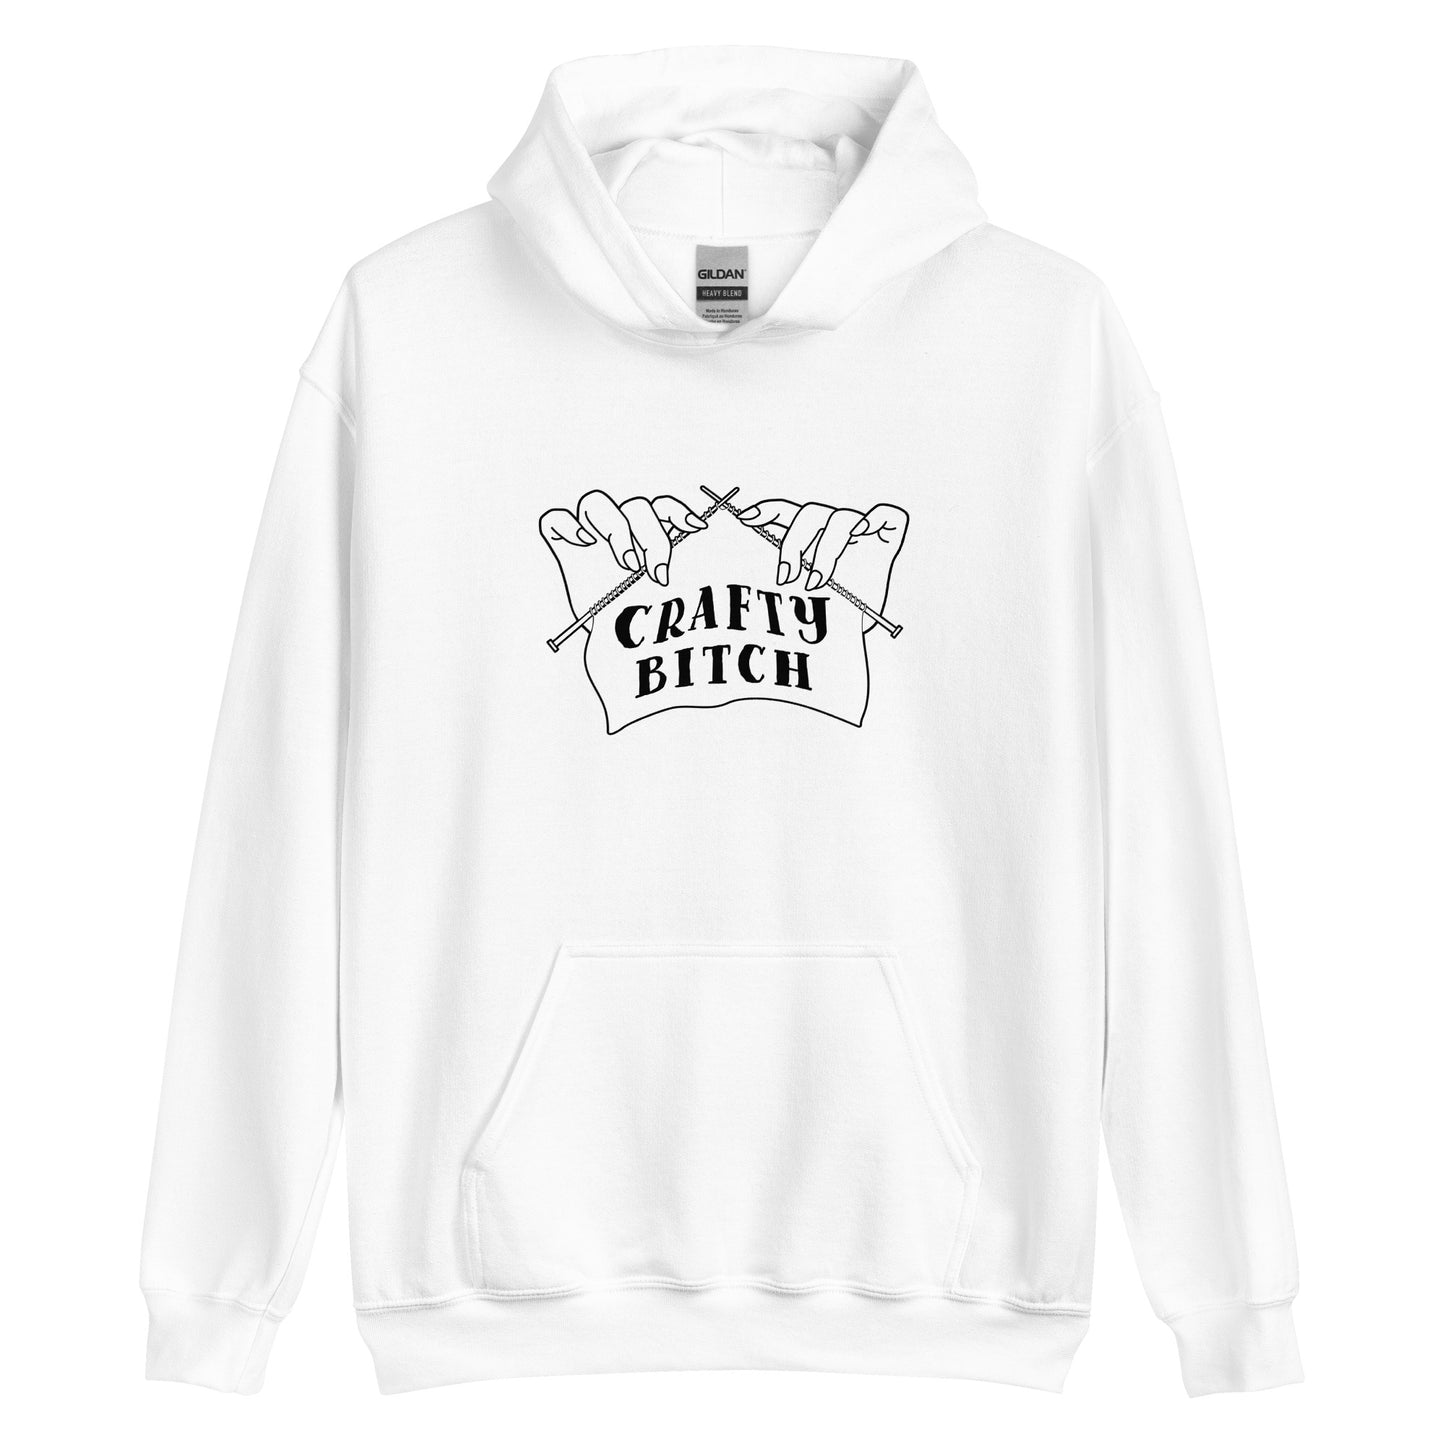 A white hooded sweatshirt featuring a single-color illustration of a pair of hands holding knitting needles. Fabric on the needles features text that reads "crafty bitch".